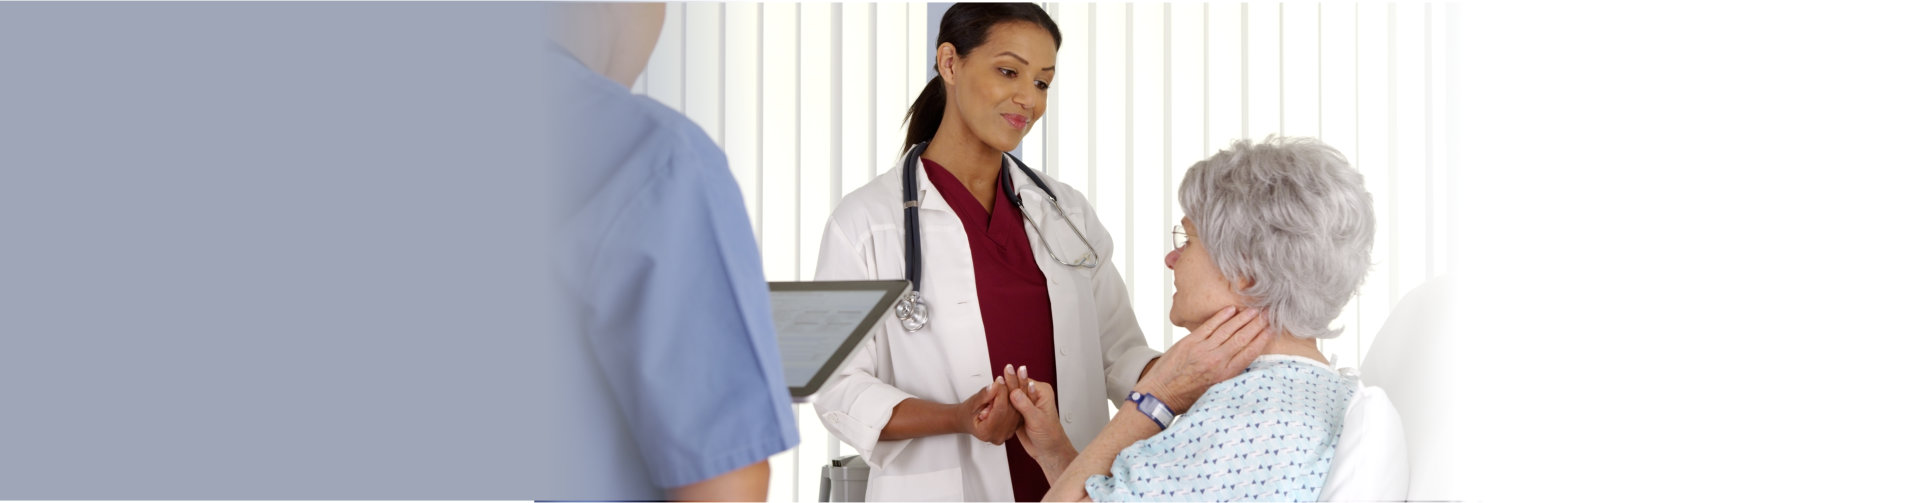 doctor and nurse talking to patient